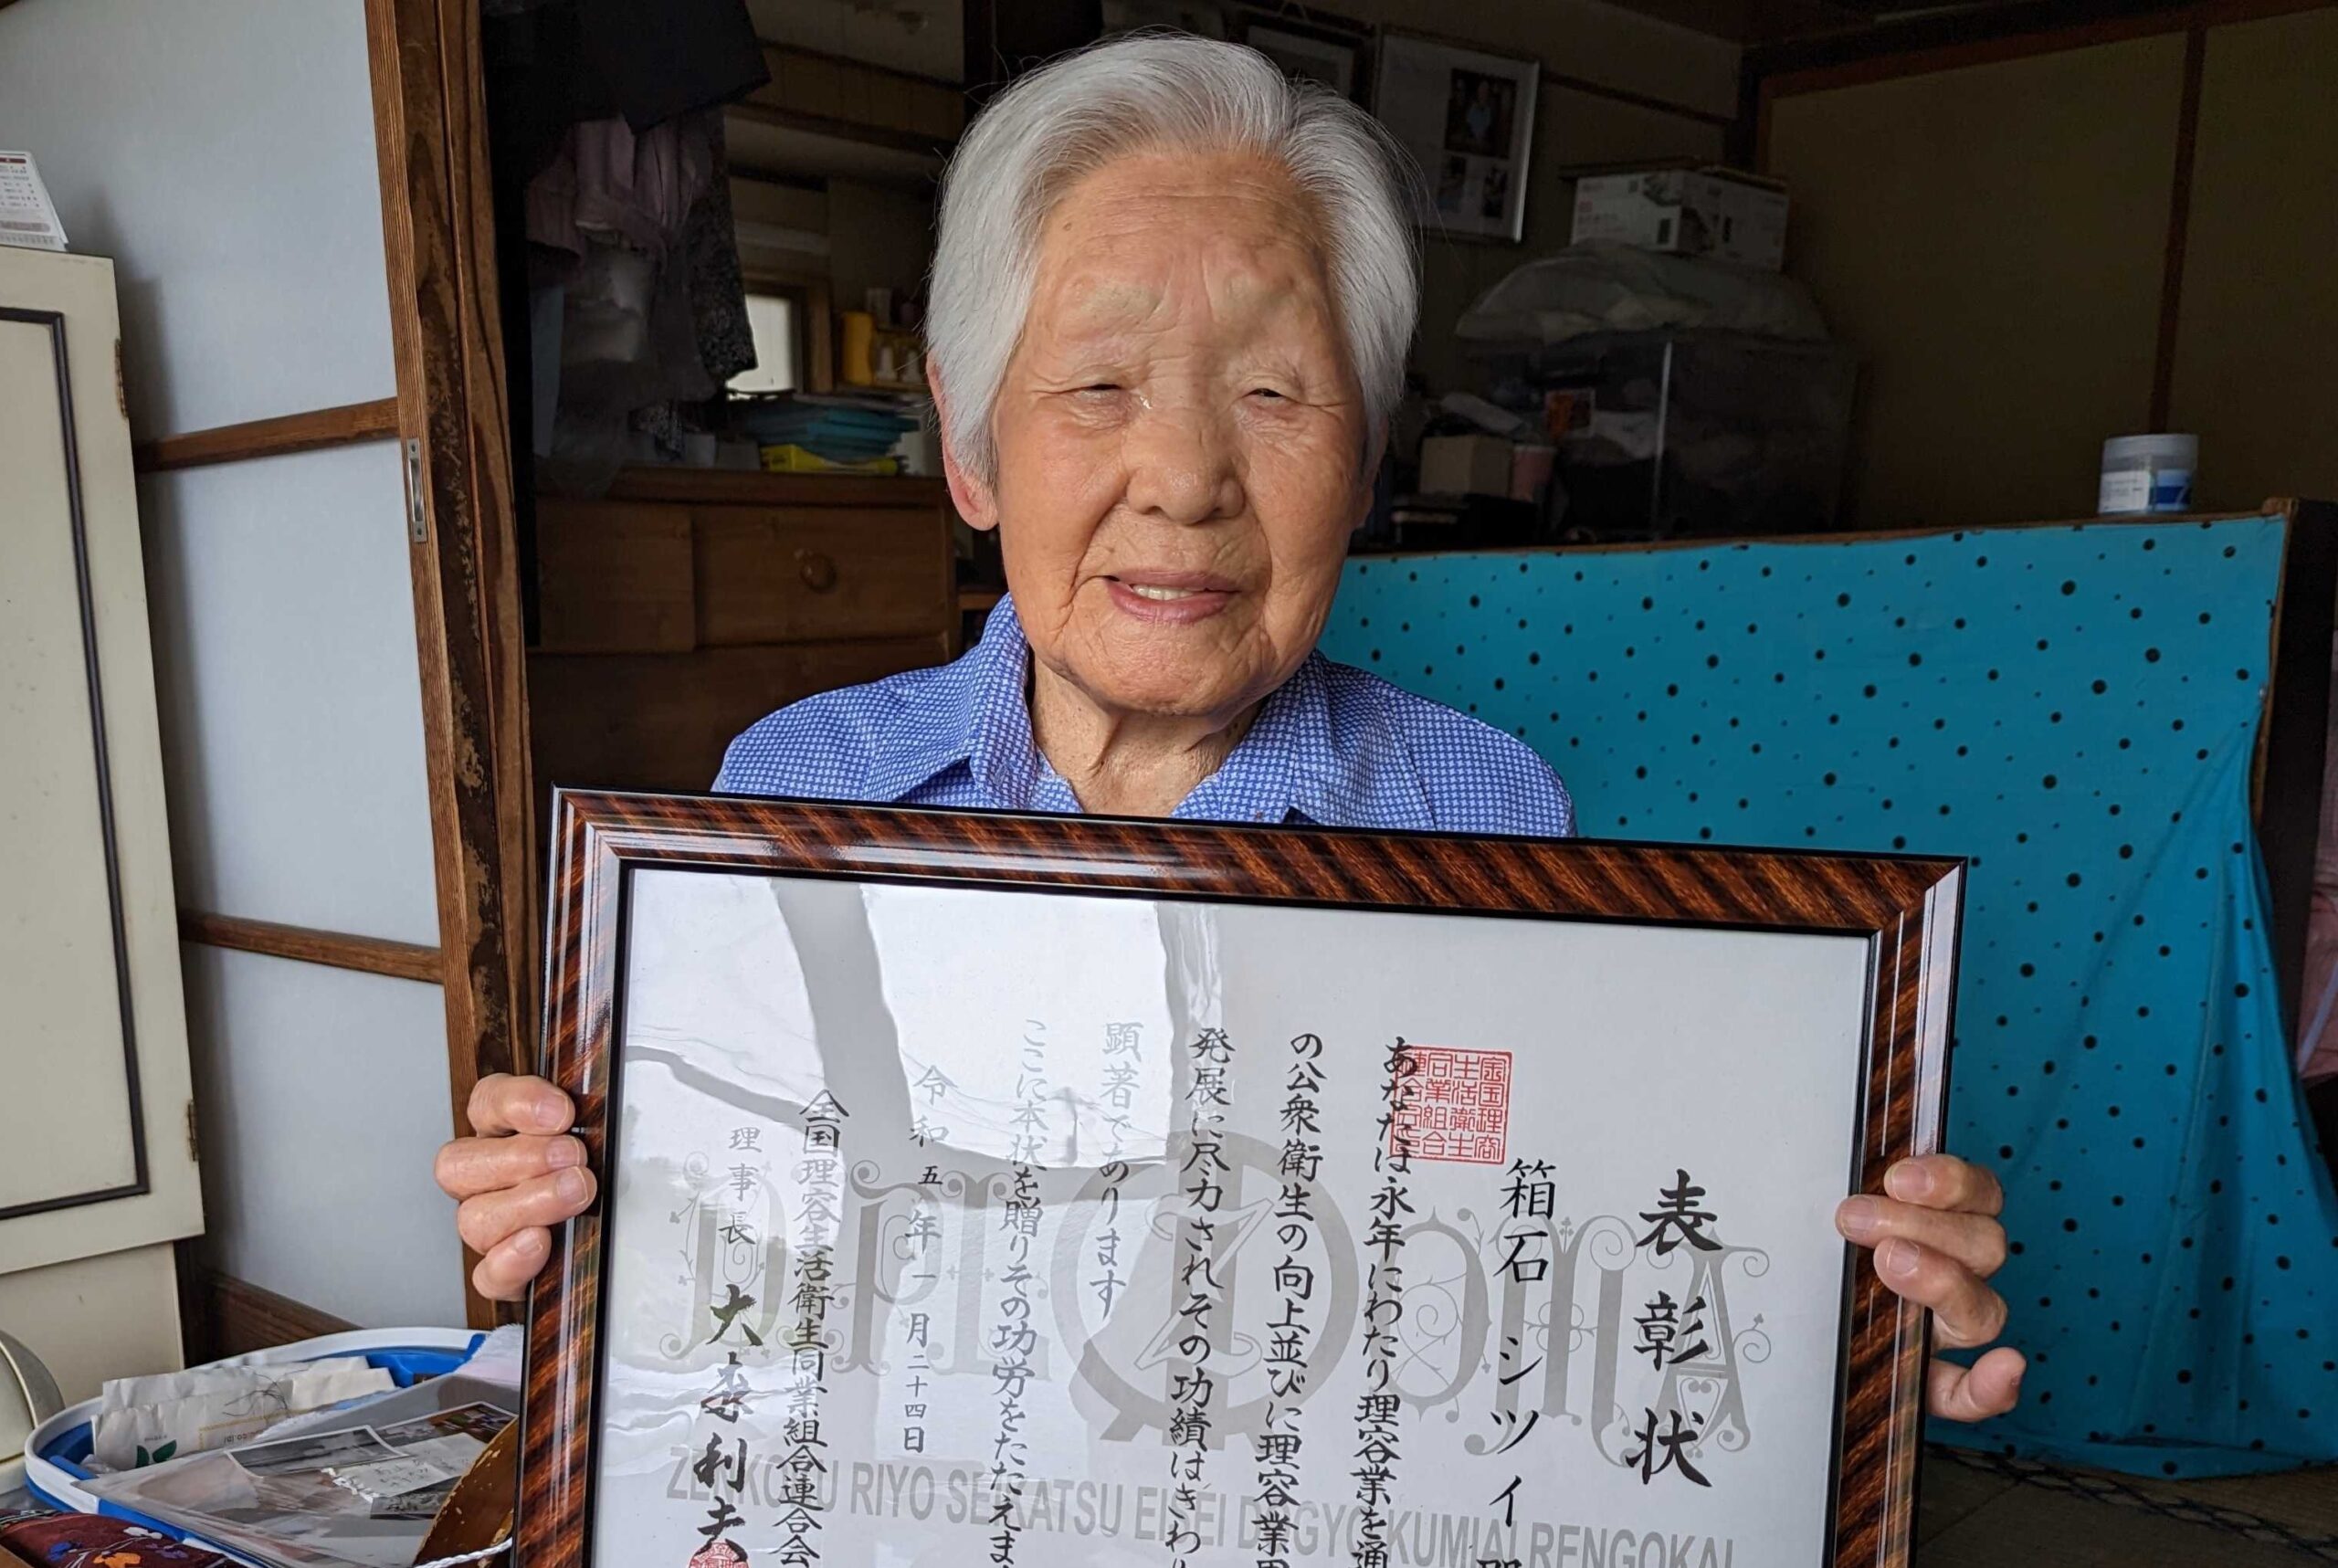 Mrs. Hakoishi was honored as the oldest active barber in the country in January 2023.